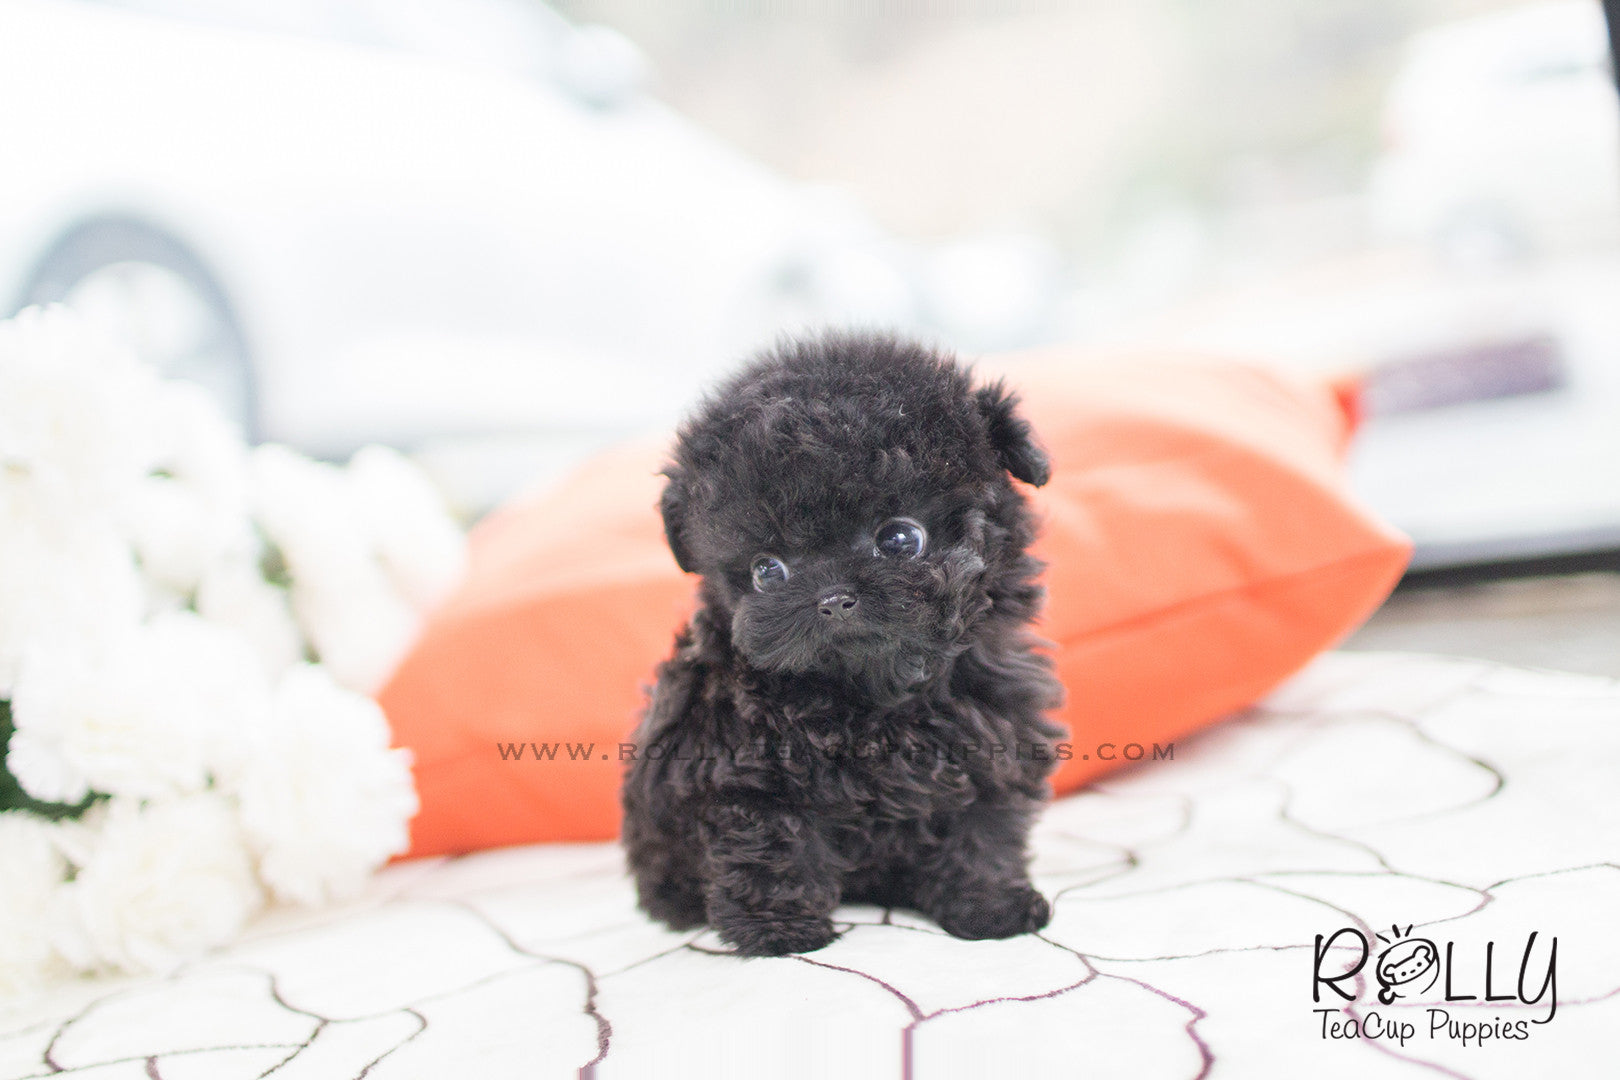 rolly teacup poodles for sale